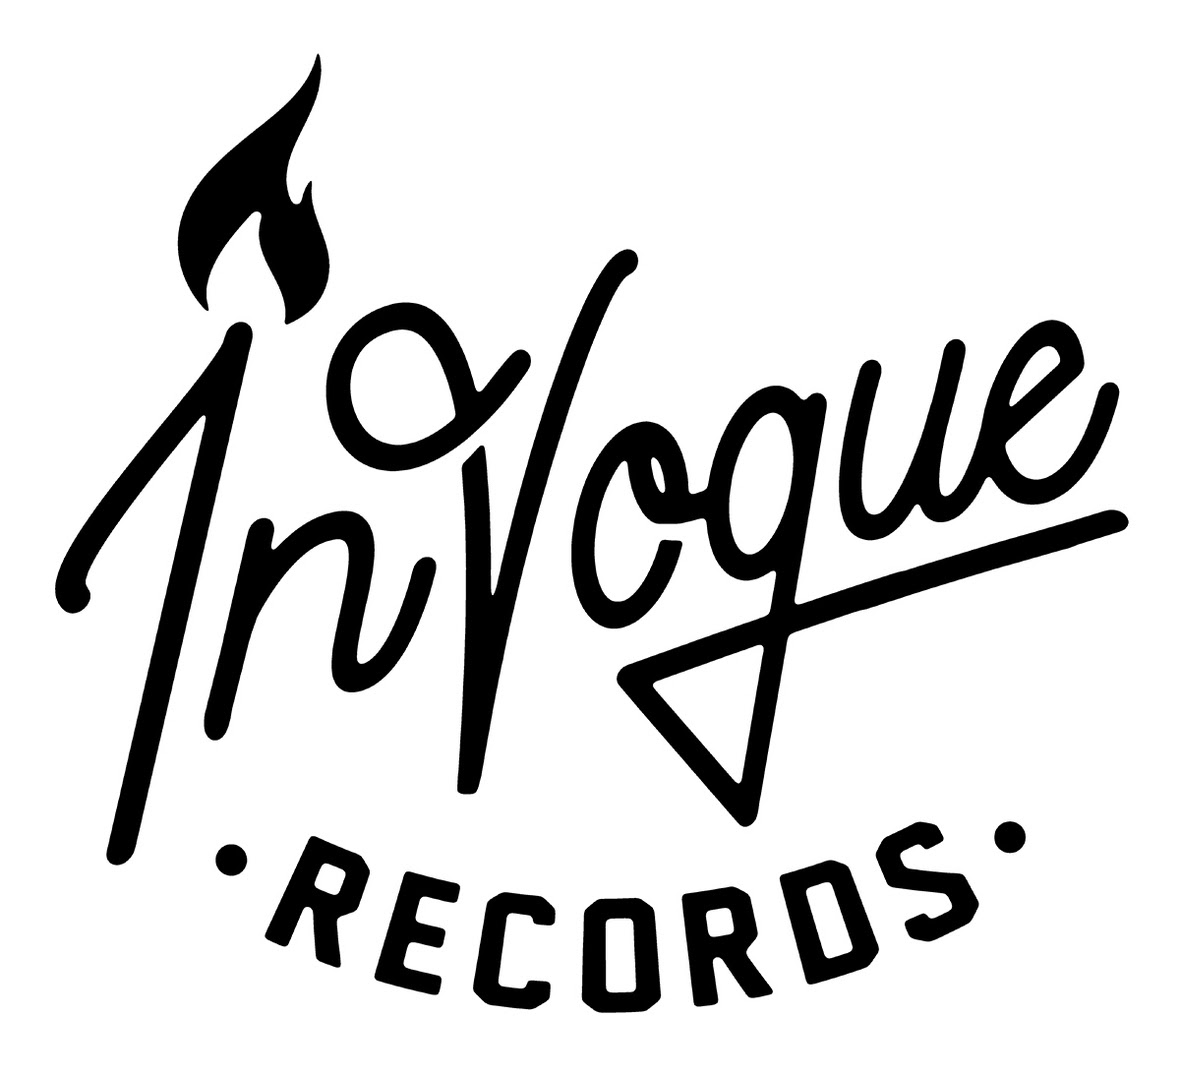 INVOGUE RECORDS JULY 2016 NEW LOGO USE THIS